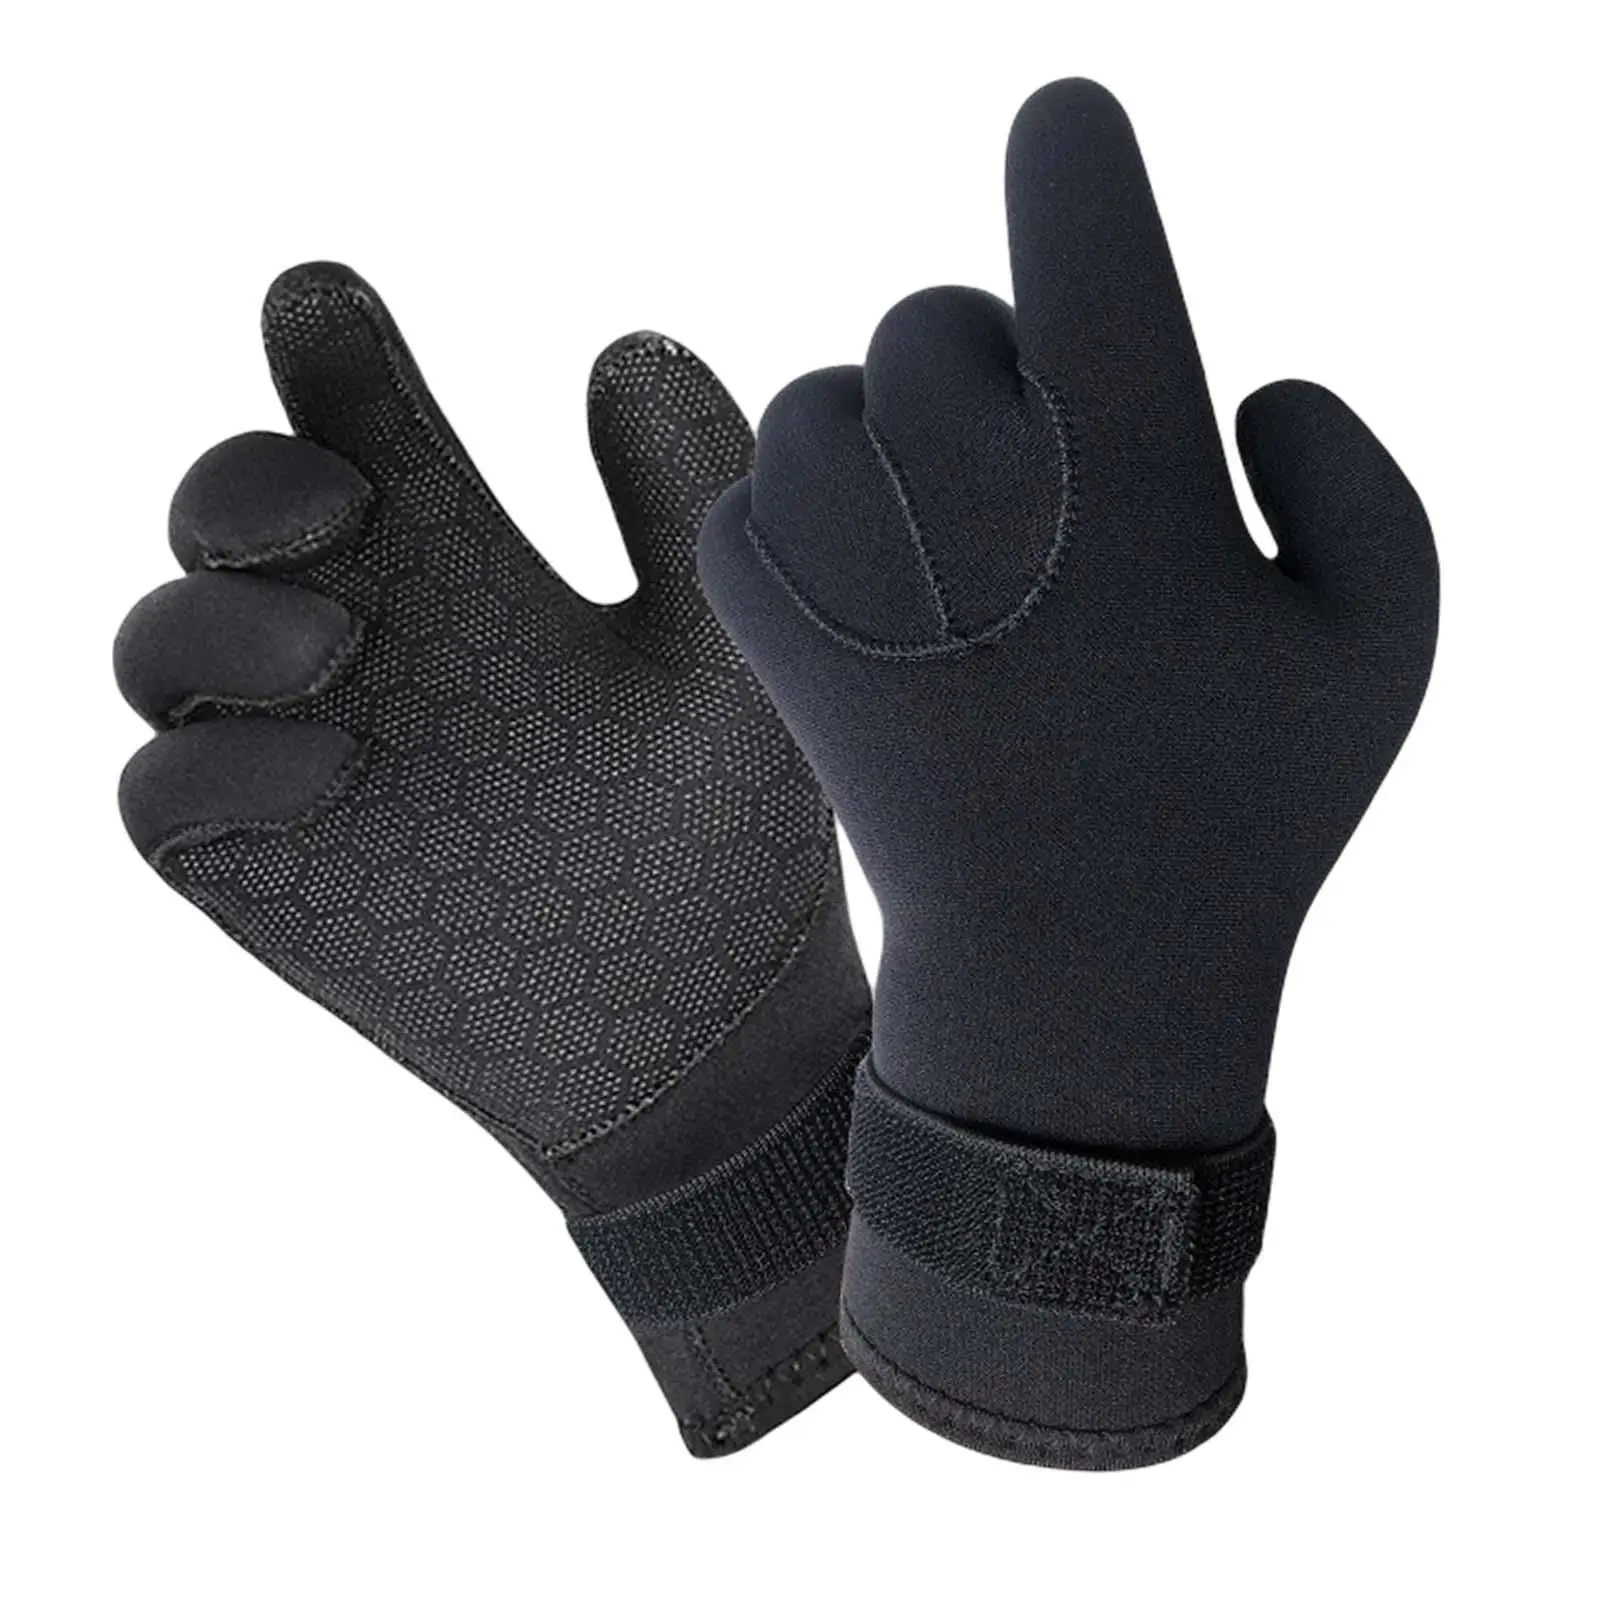 Diving Gloves Thermal Wetsuit Gloves Warm Dive Gloves for Paddling Surfing